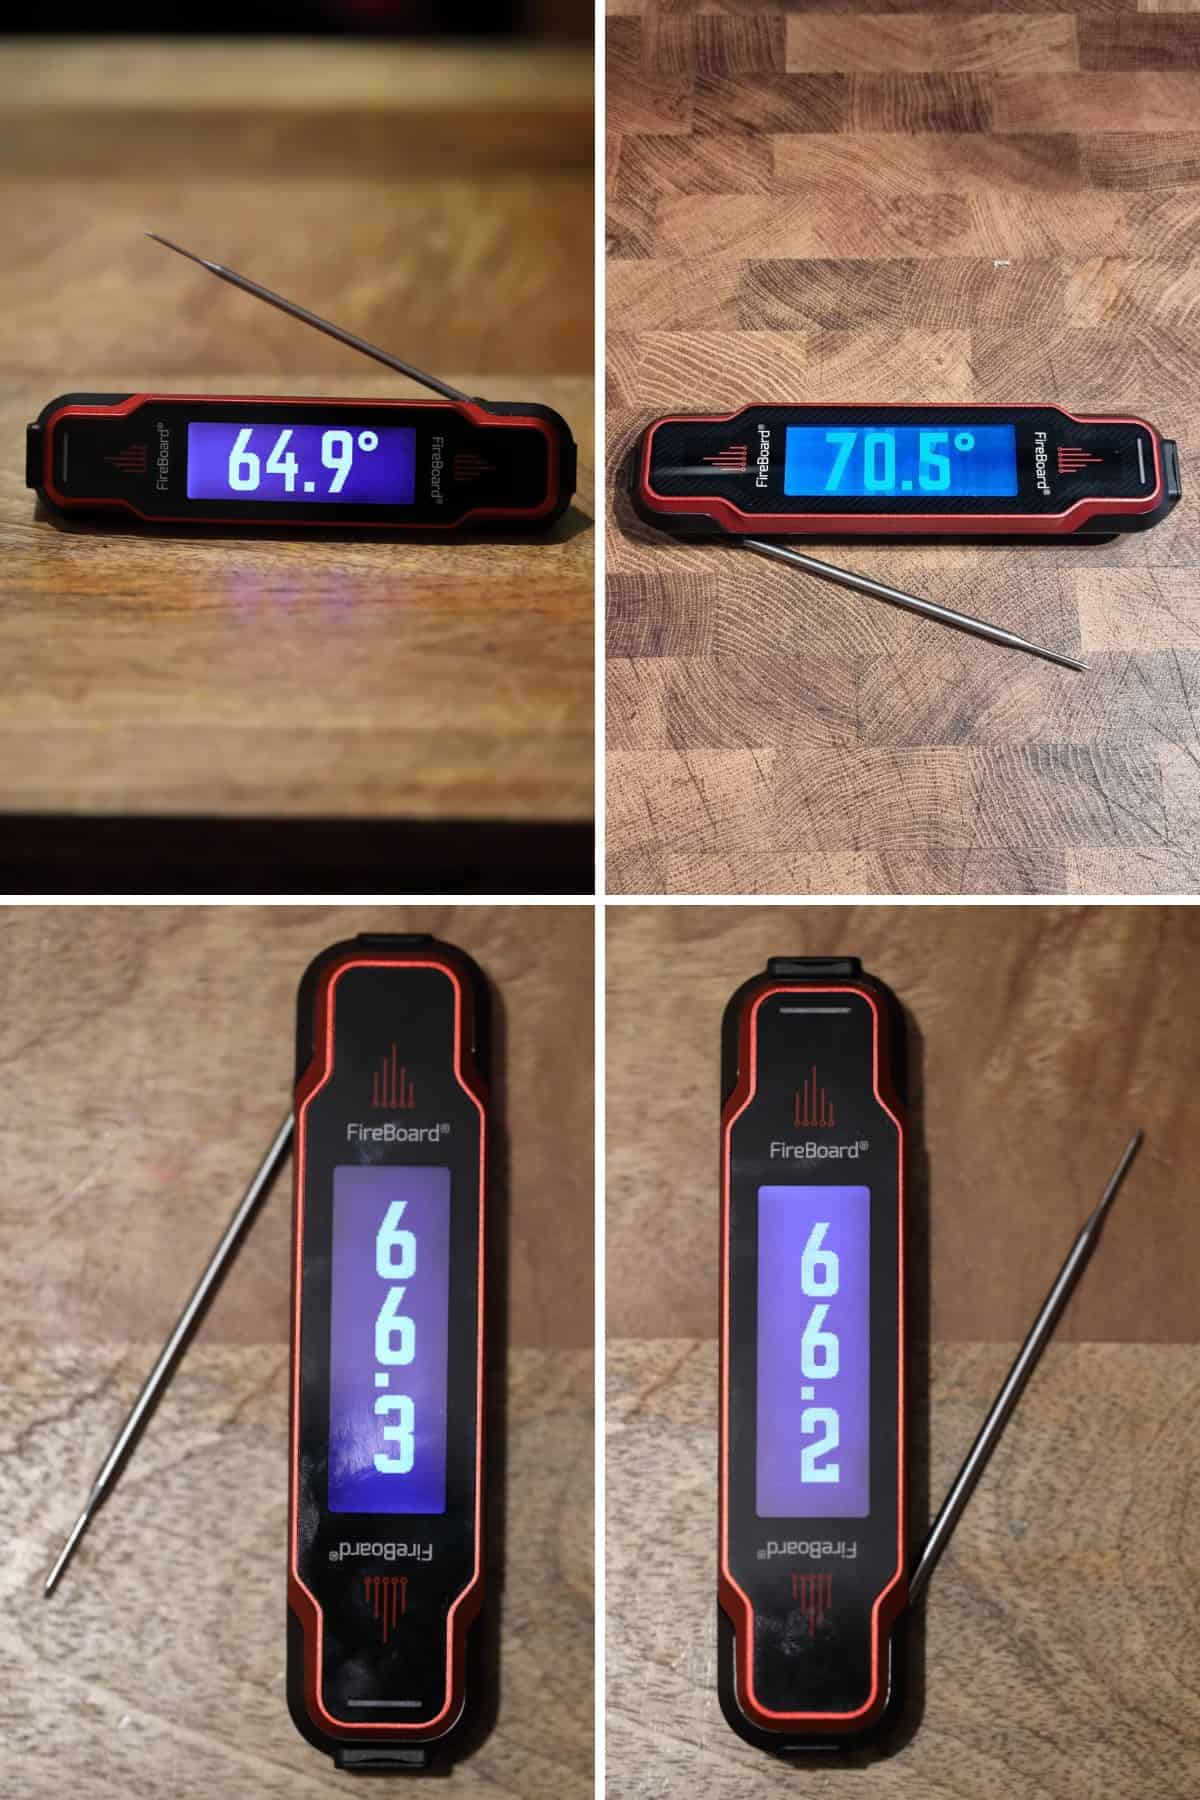 Four photos showing the auto-rotating display of the Fireboard Spark in 4 different orientations.